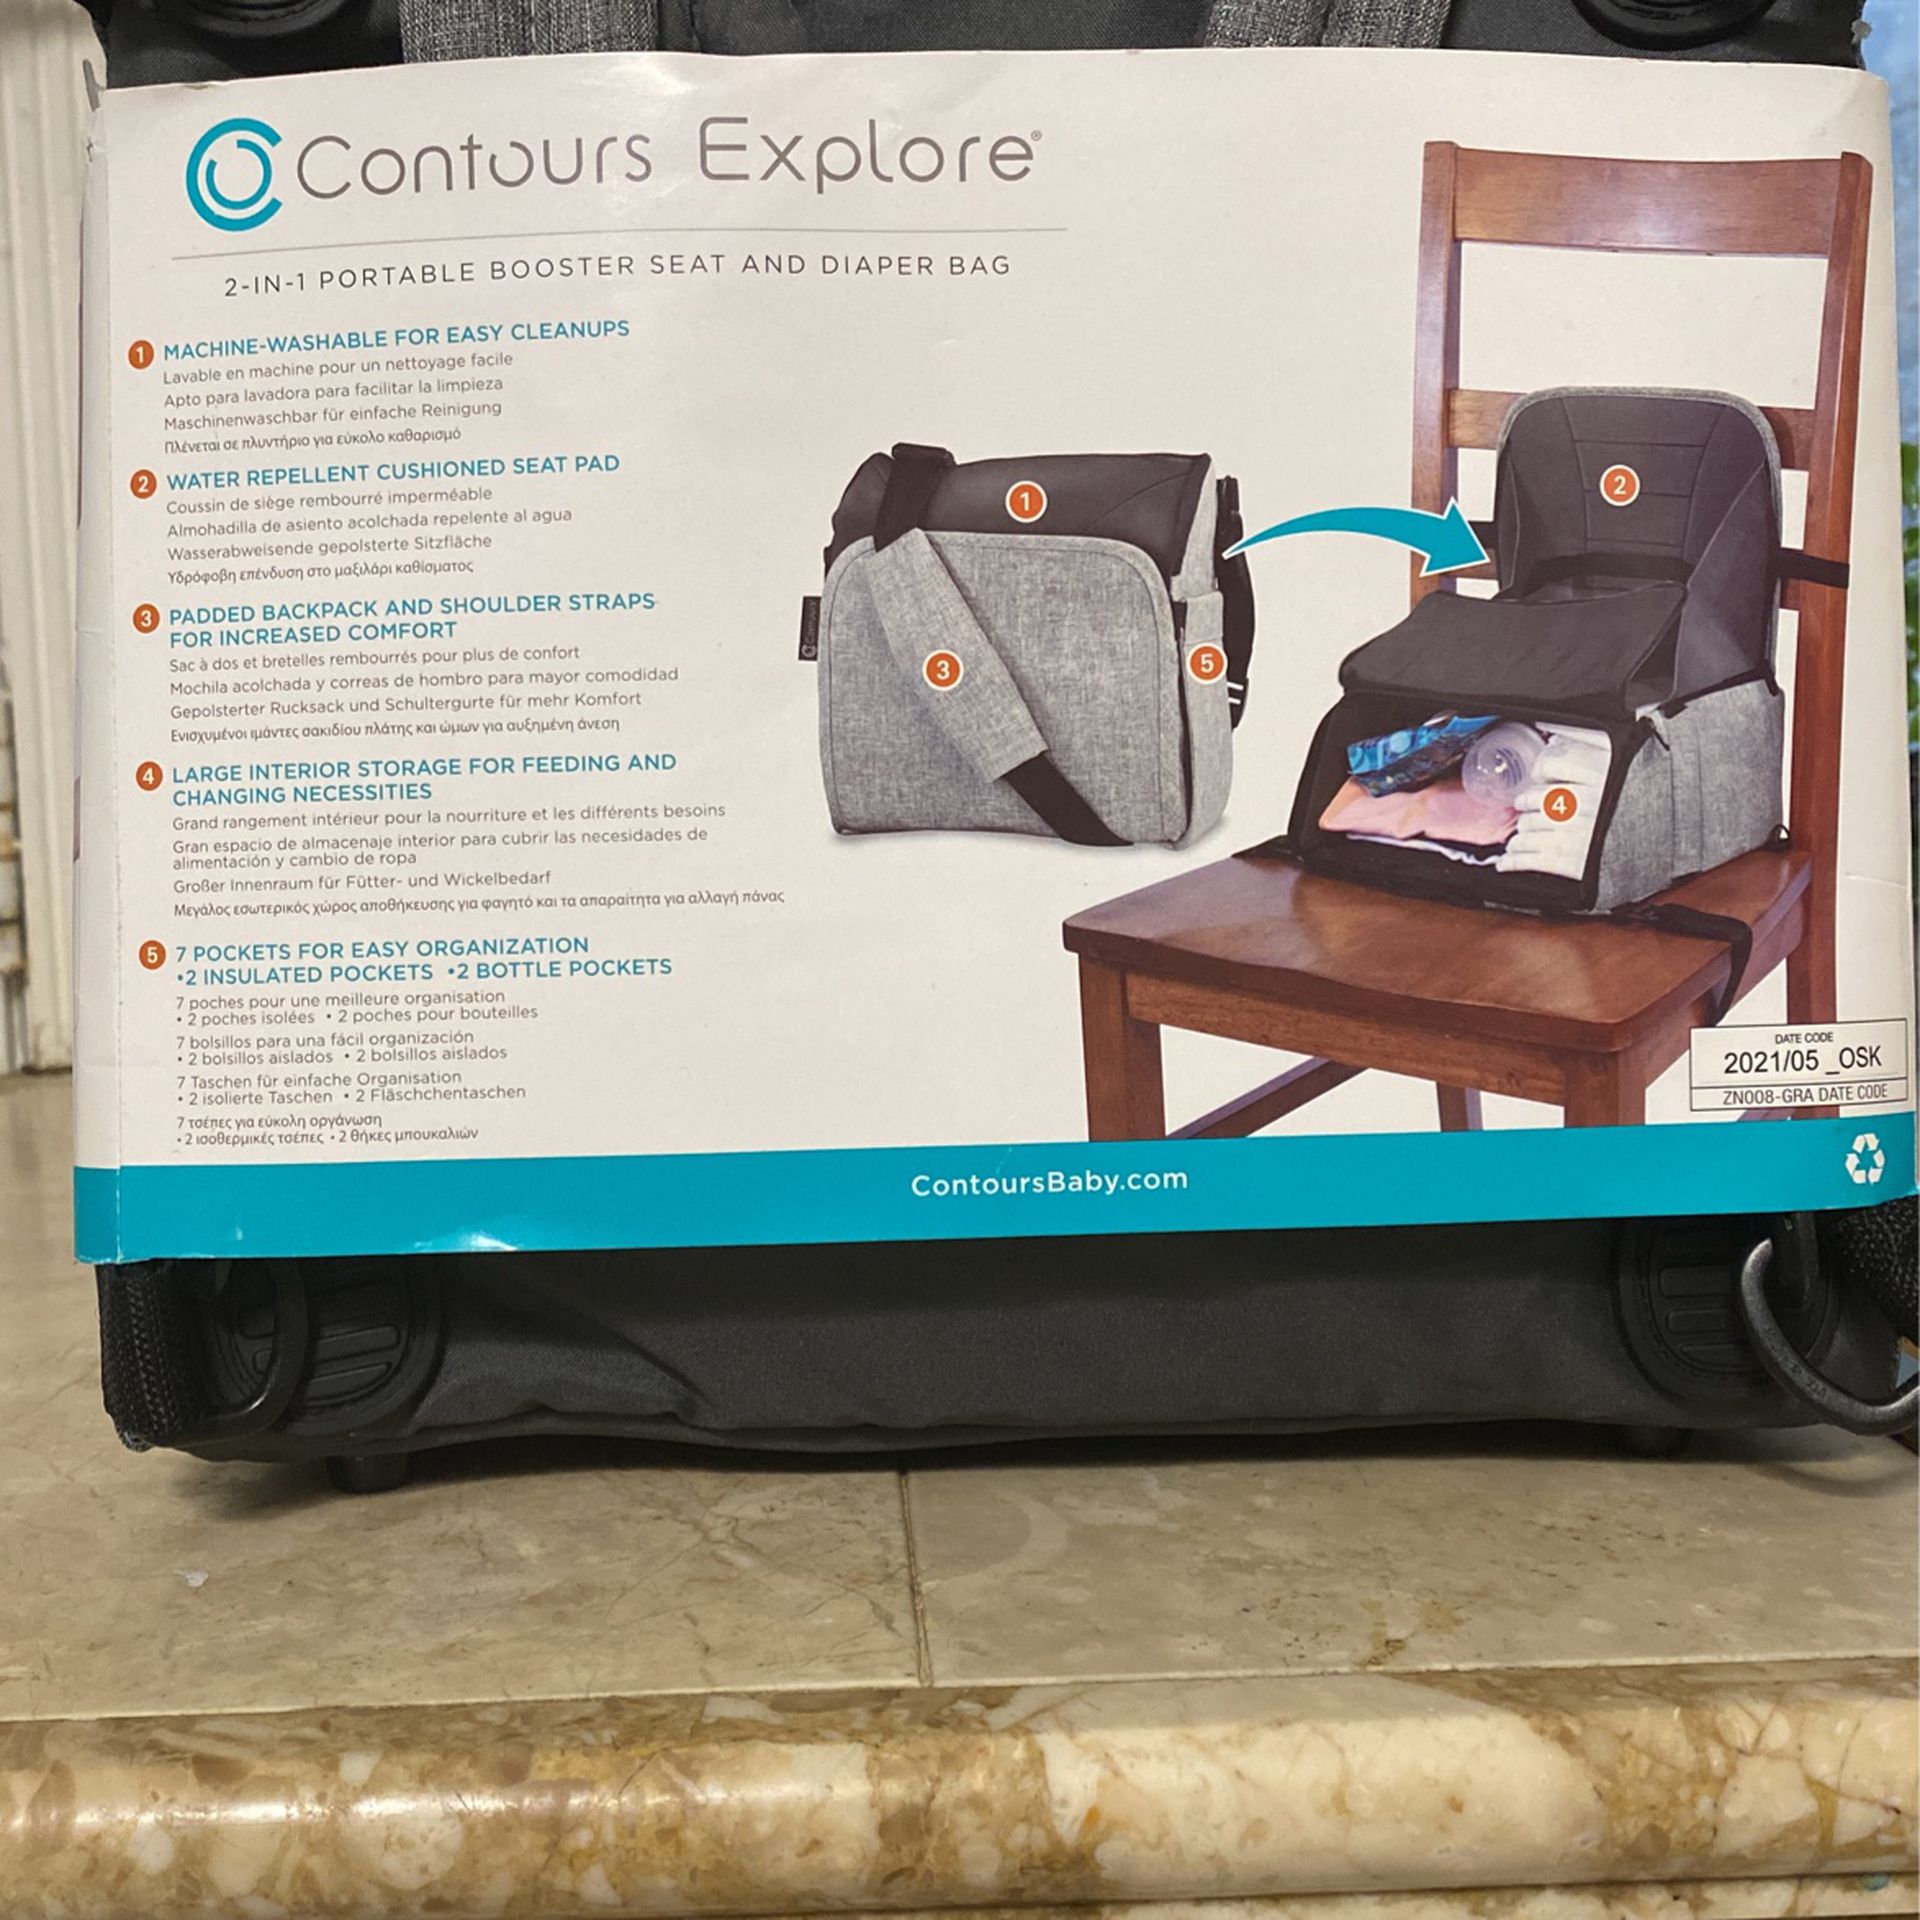 Contours Explore 2-in-1 Portable Booster Seat and Backpack Diaper Bag